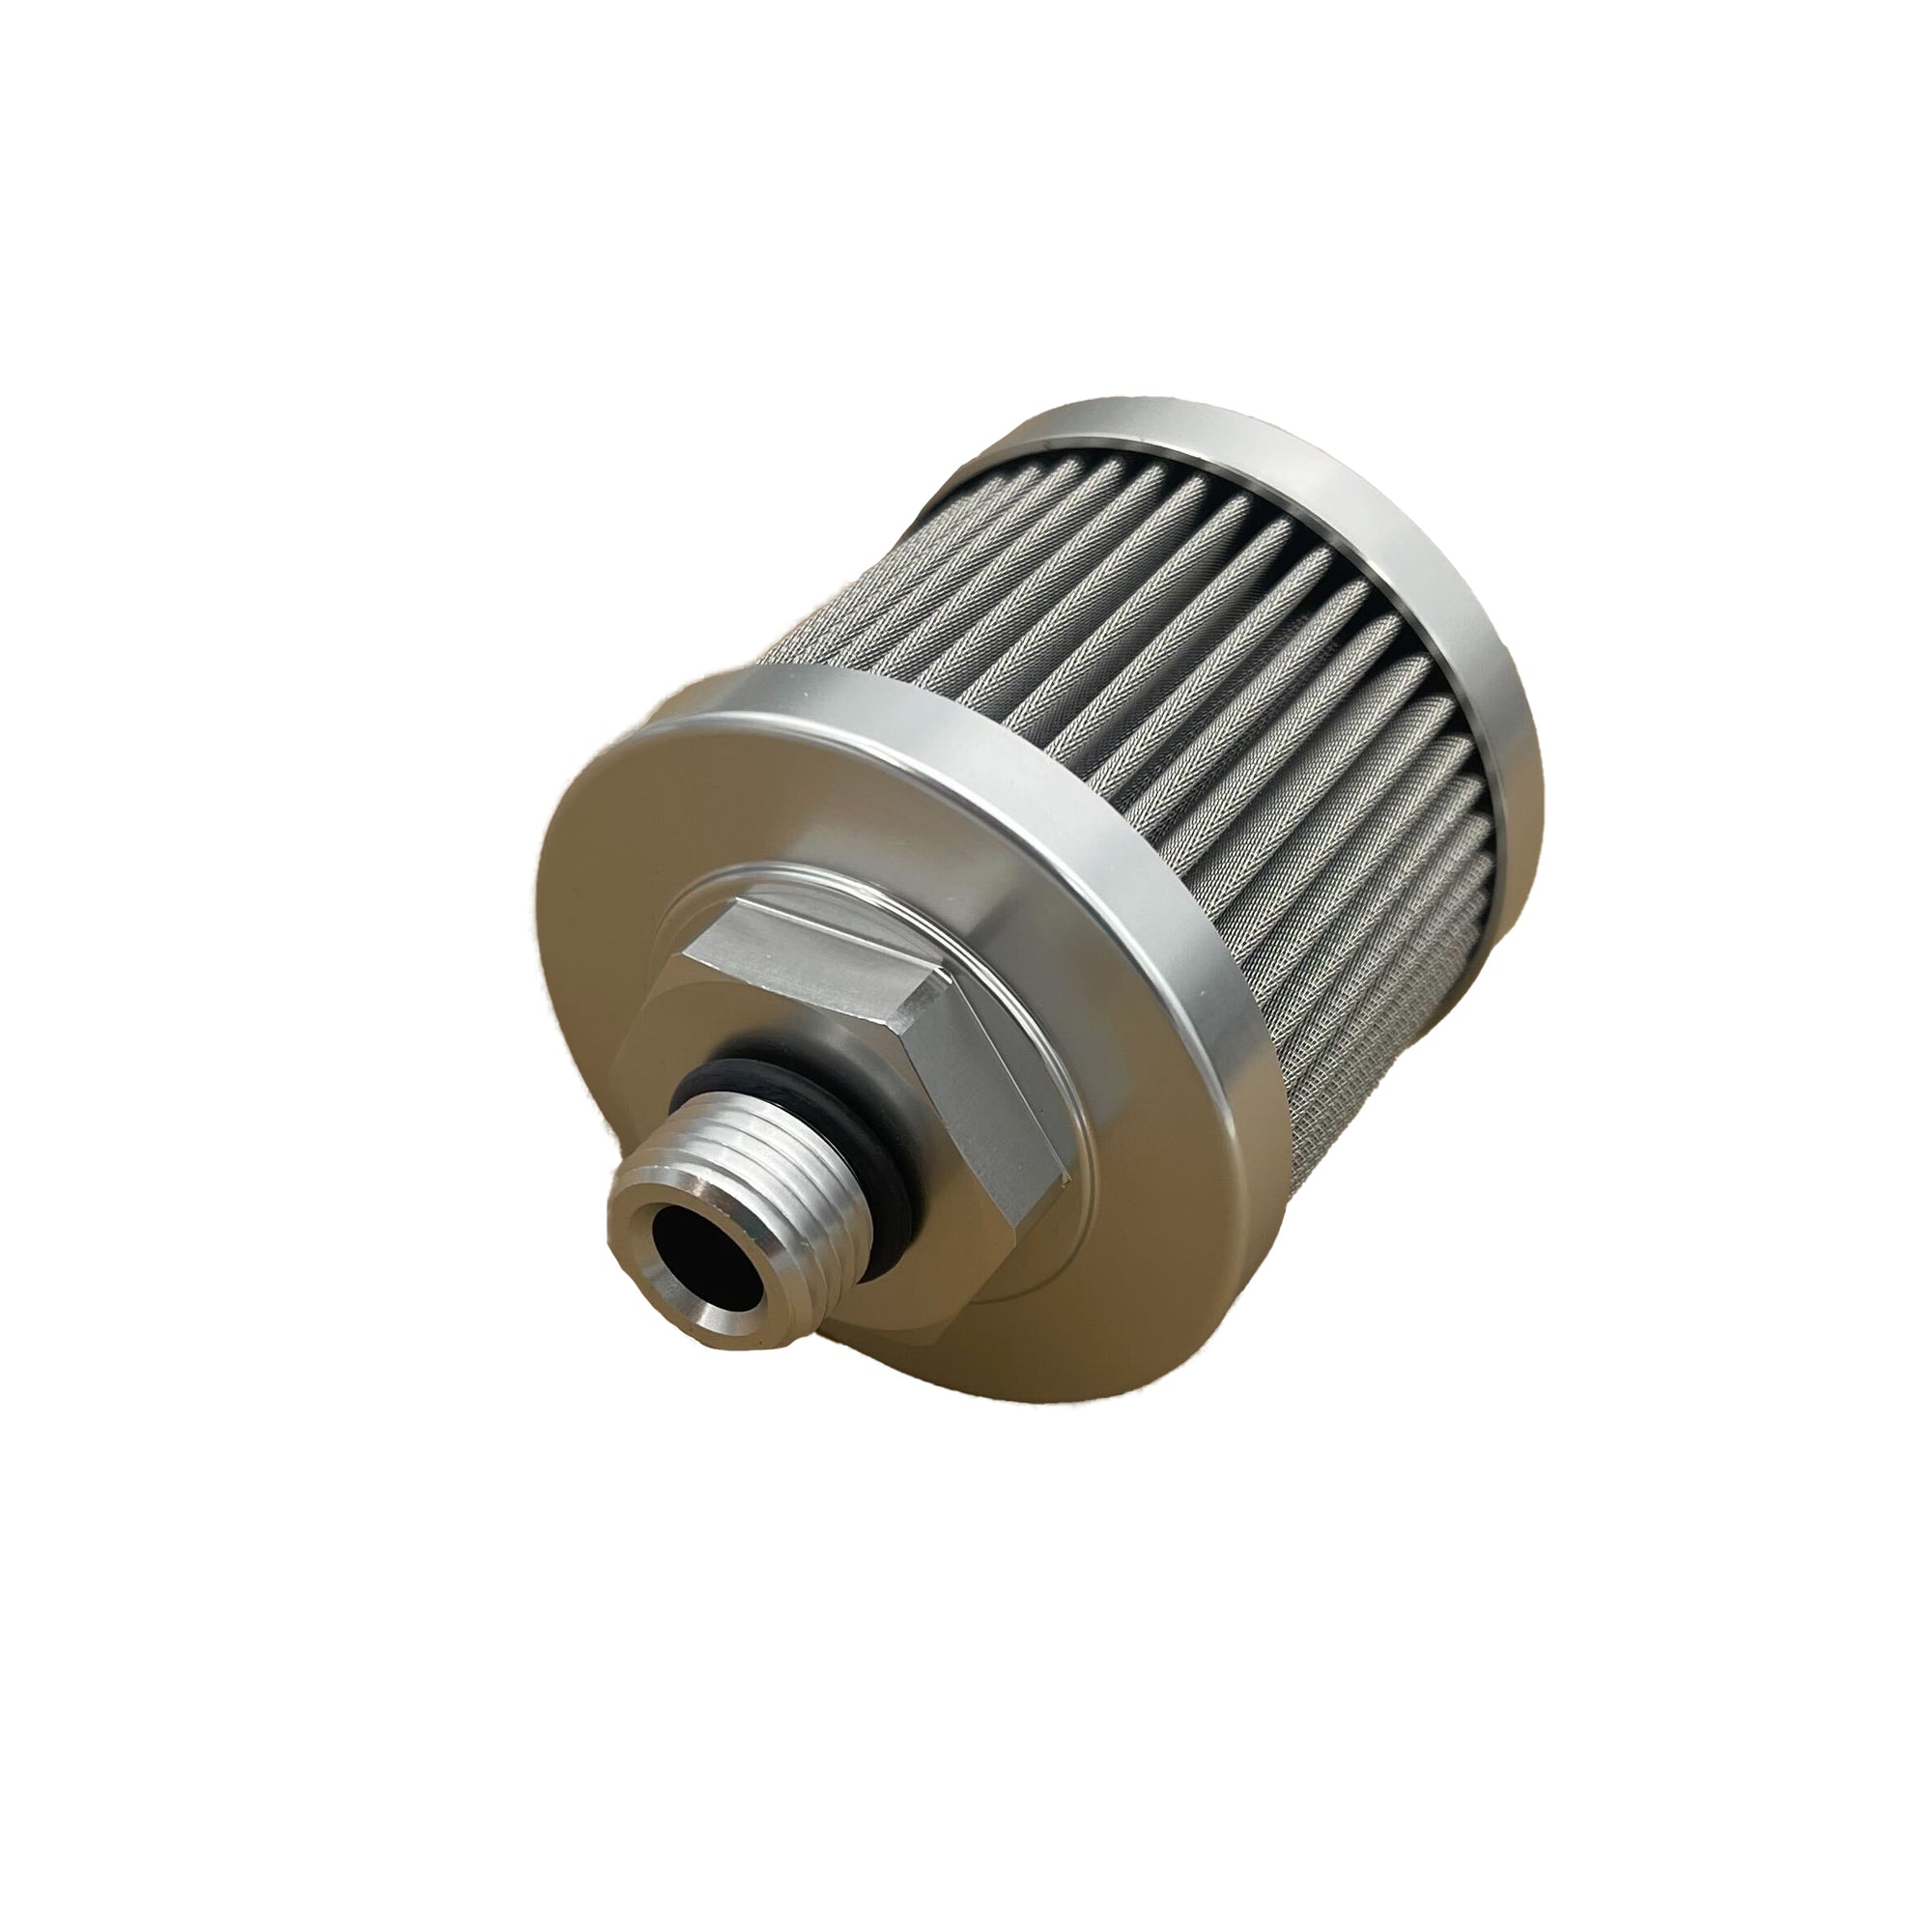 AN6 Stainless Steel Fuel Filter - 60 MICRO